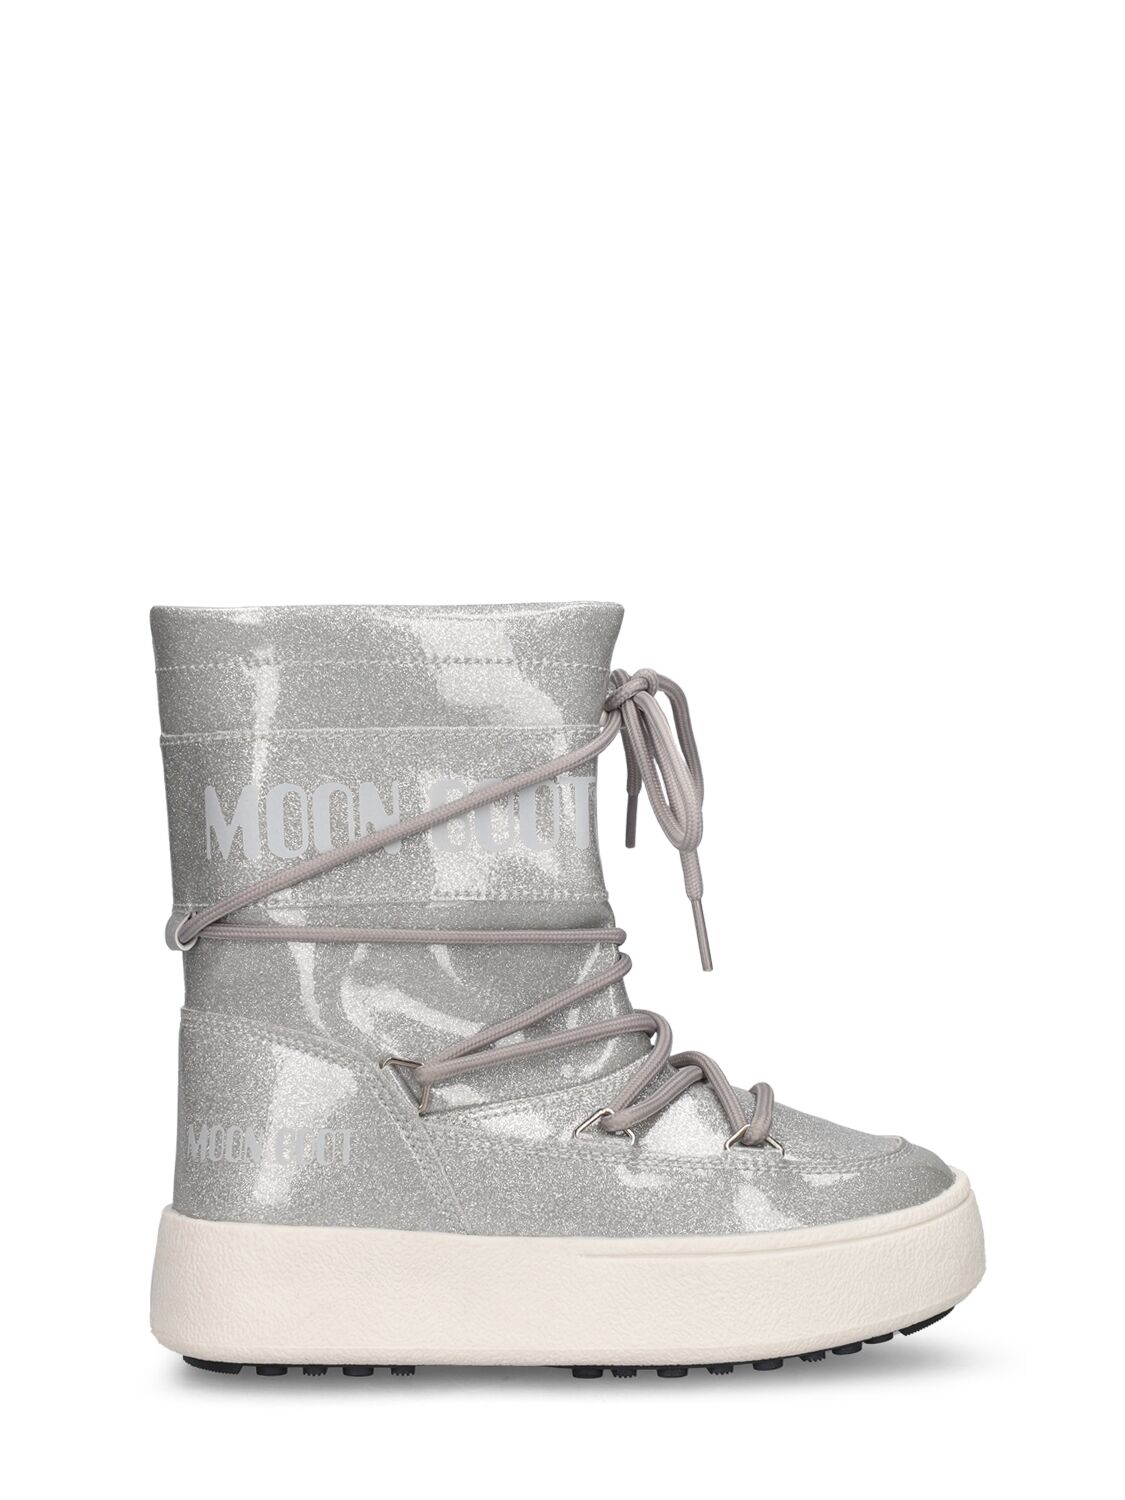 Image of Nylon Glitter Ankle Snow Boots